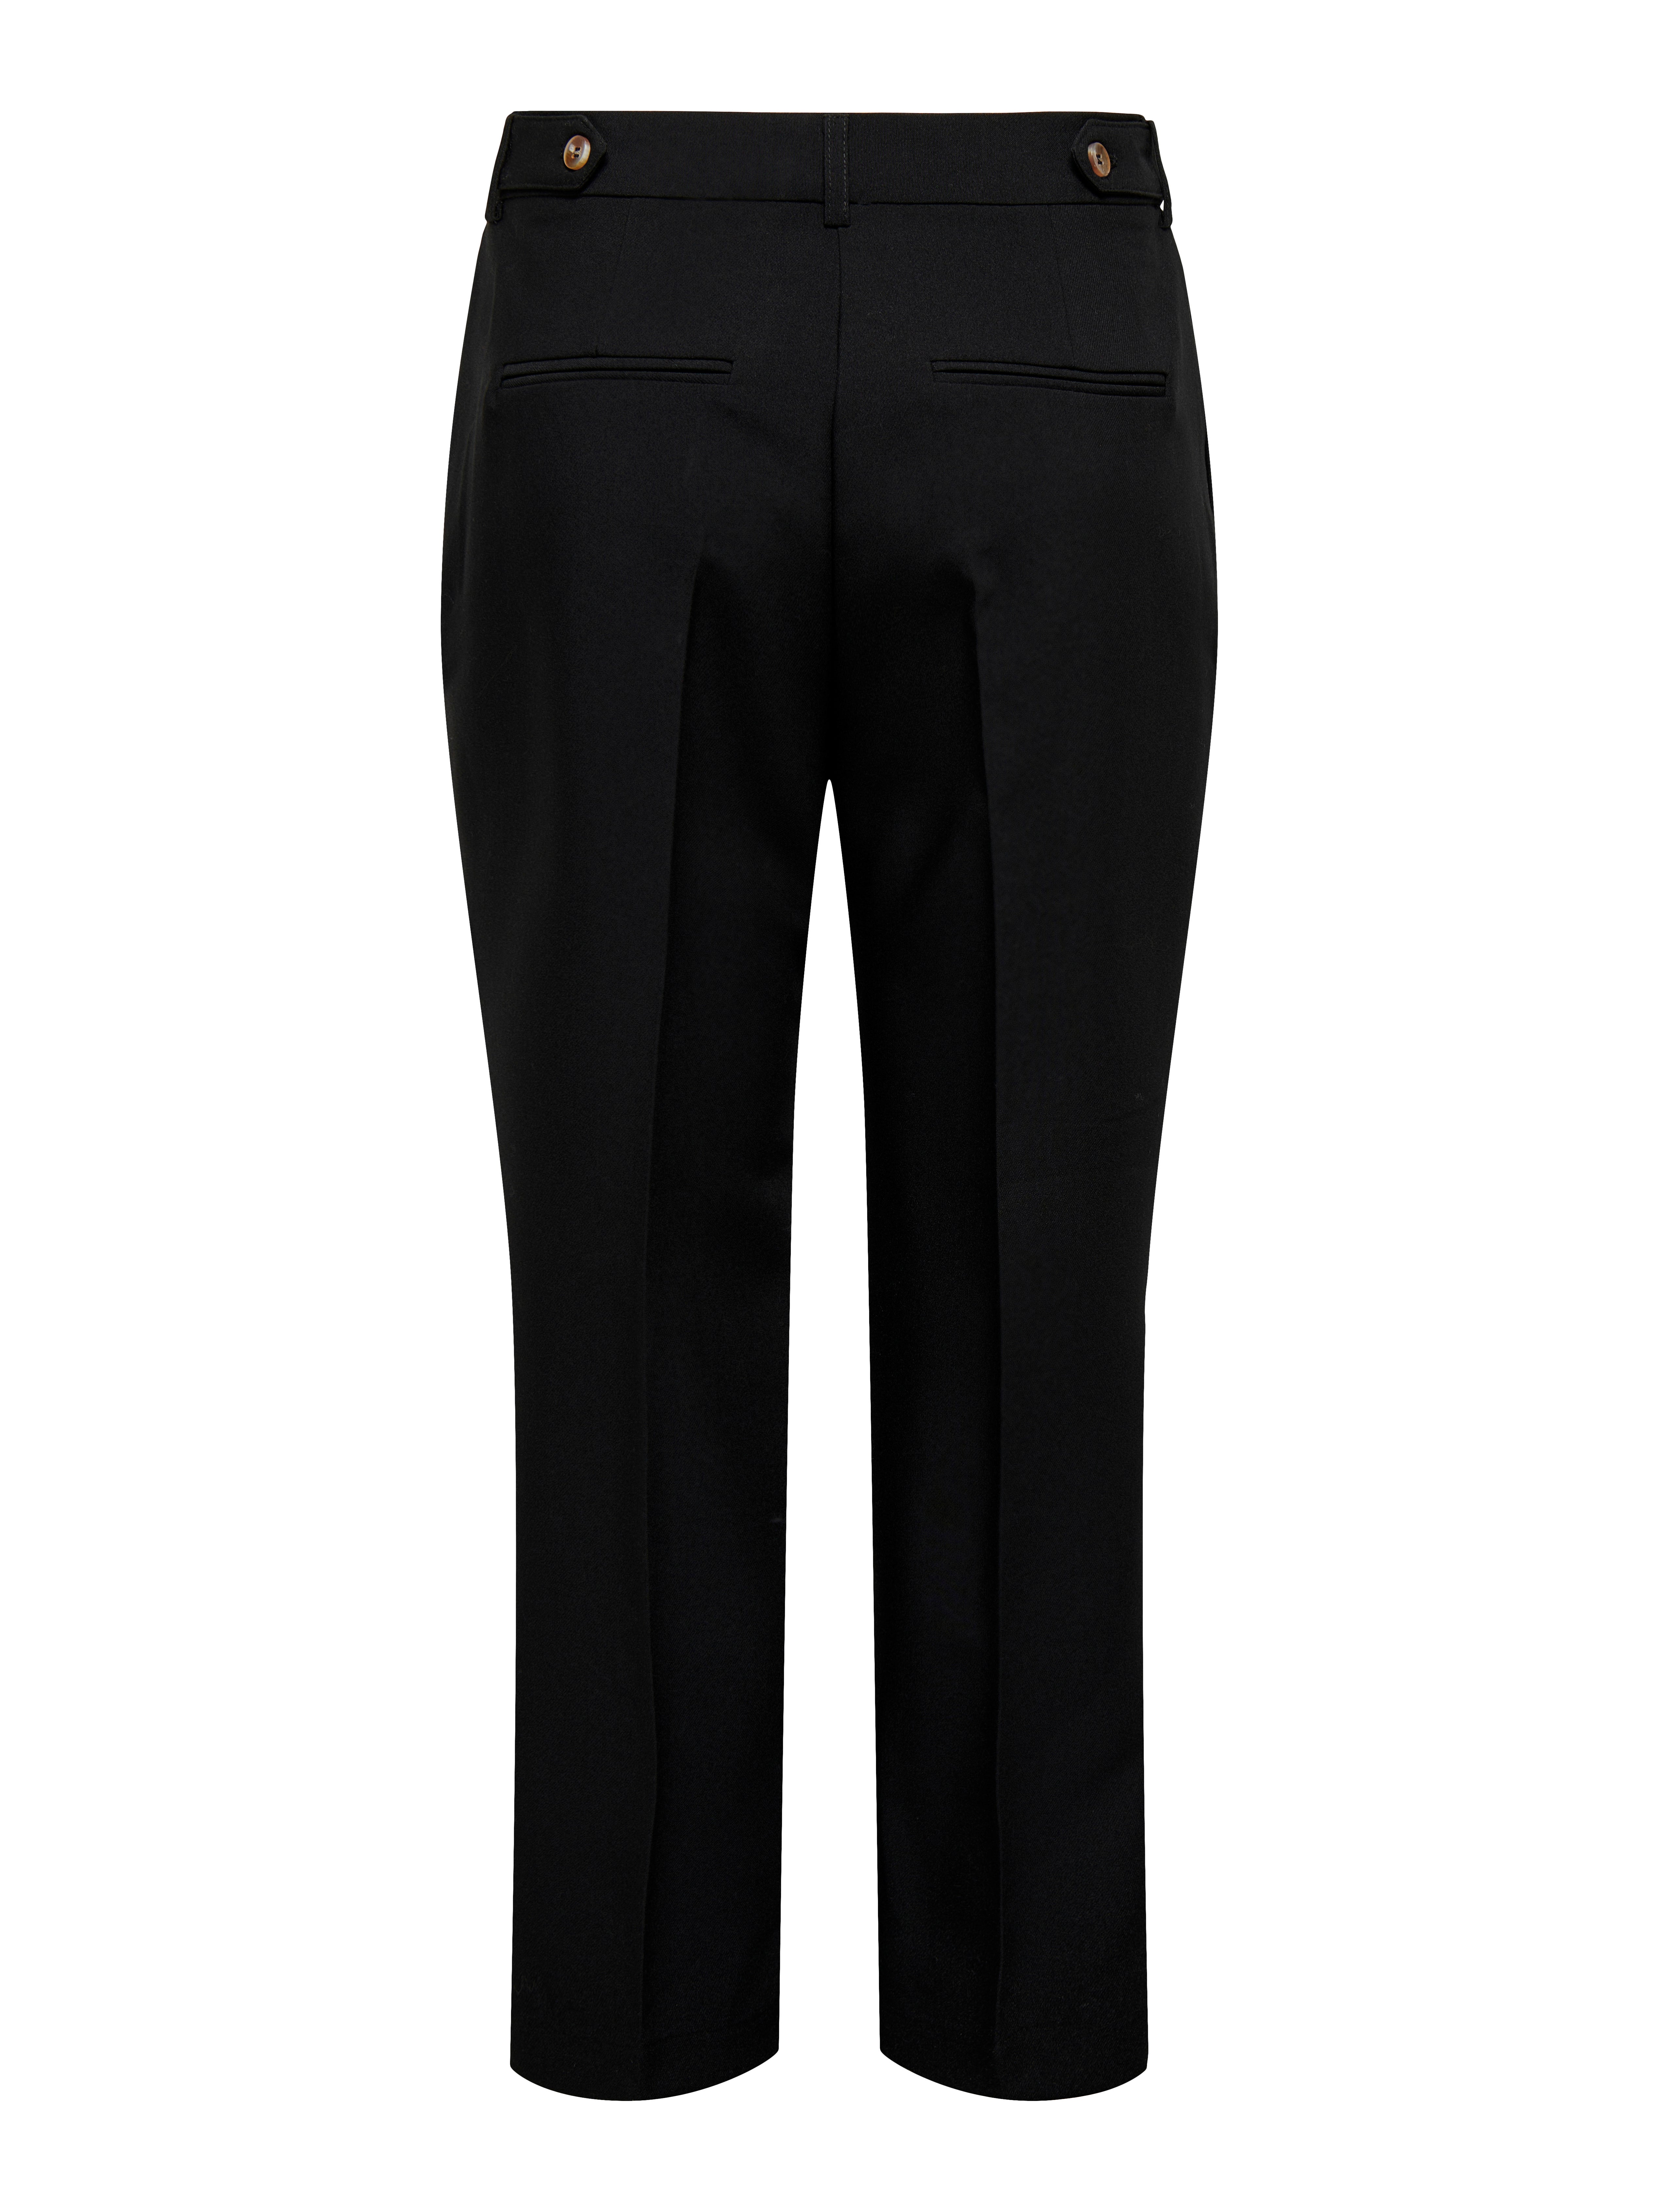 AND Trousers and Pants : Buy AND Women Teal Formal Cigarette Pants  Online|Nykaa Fashion